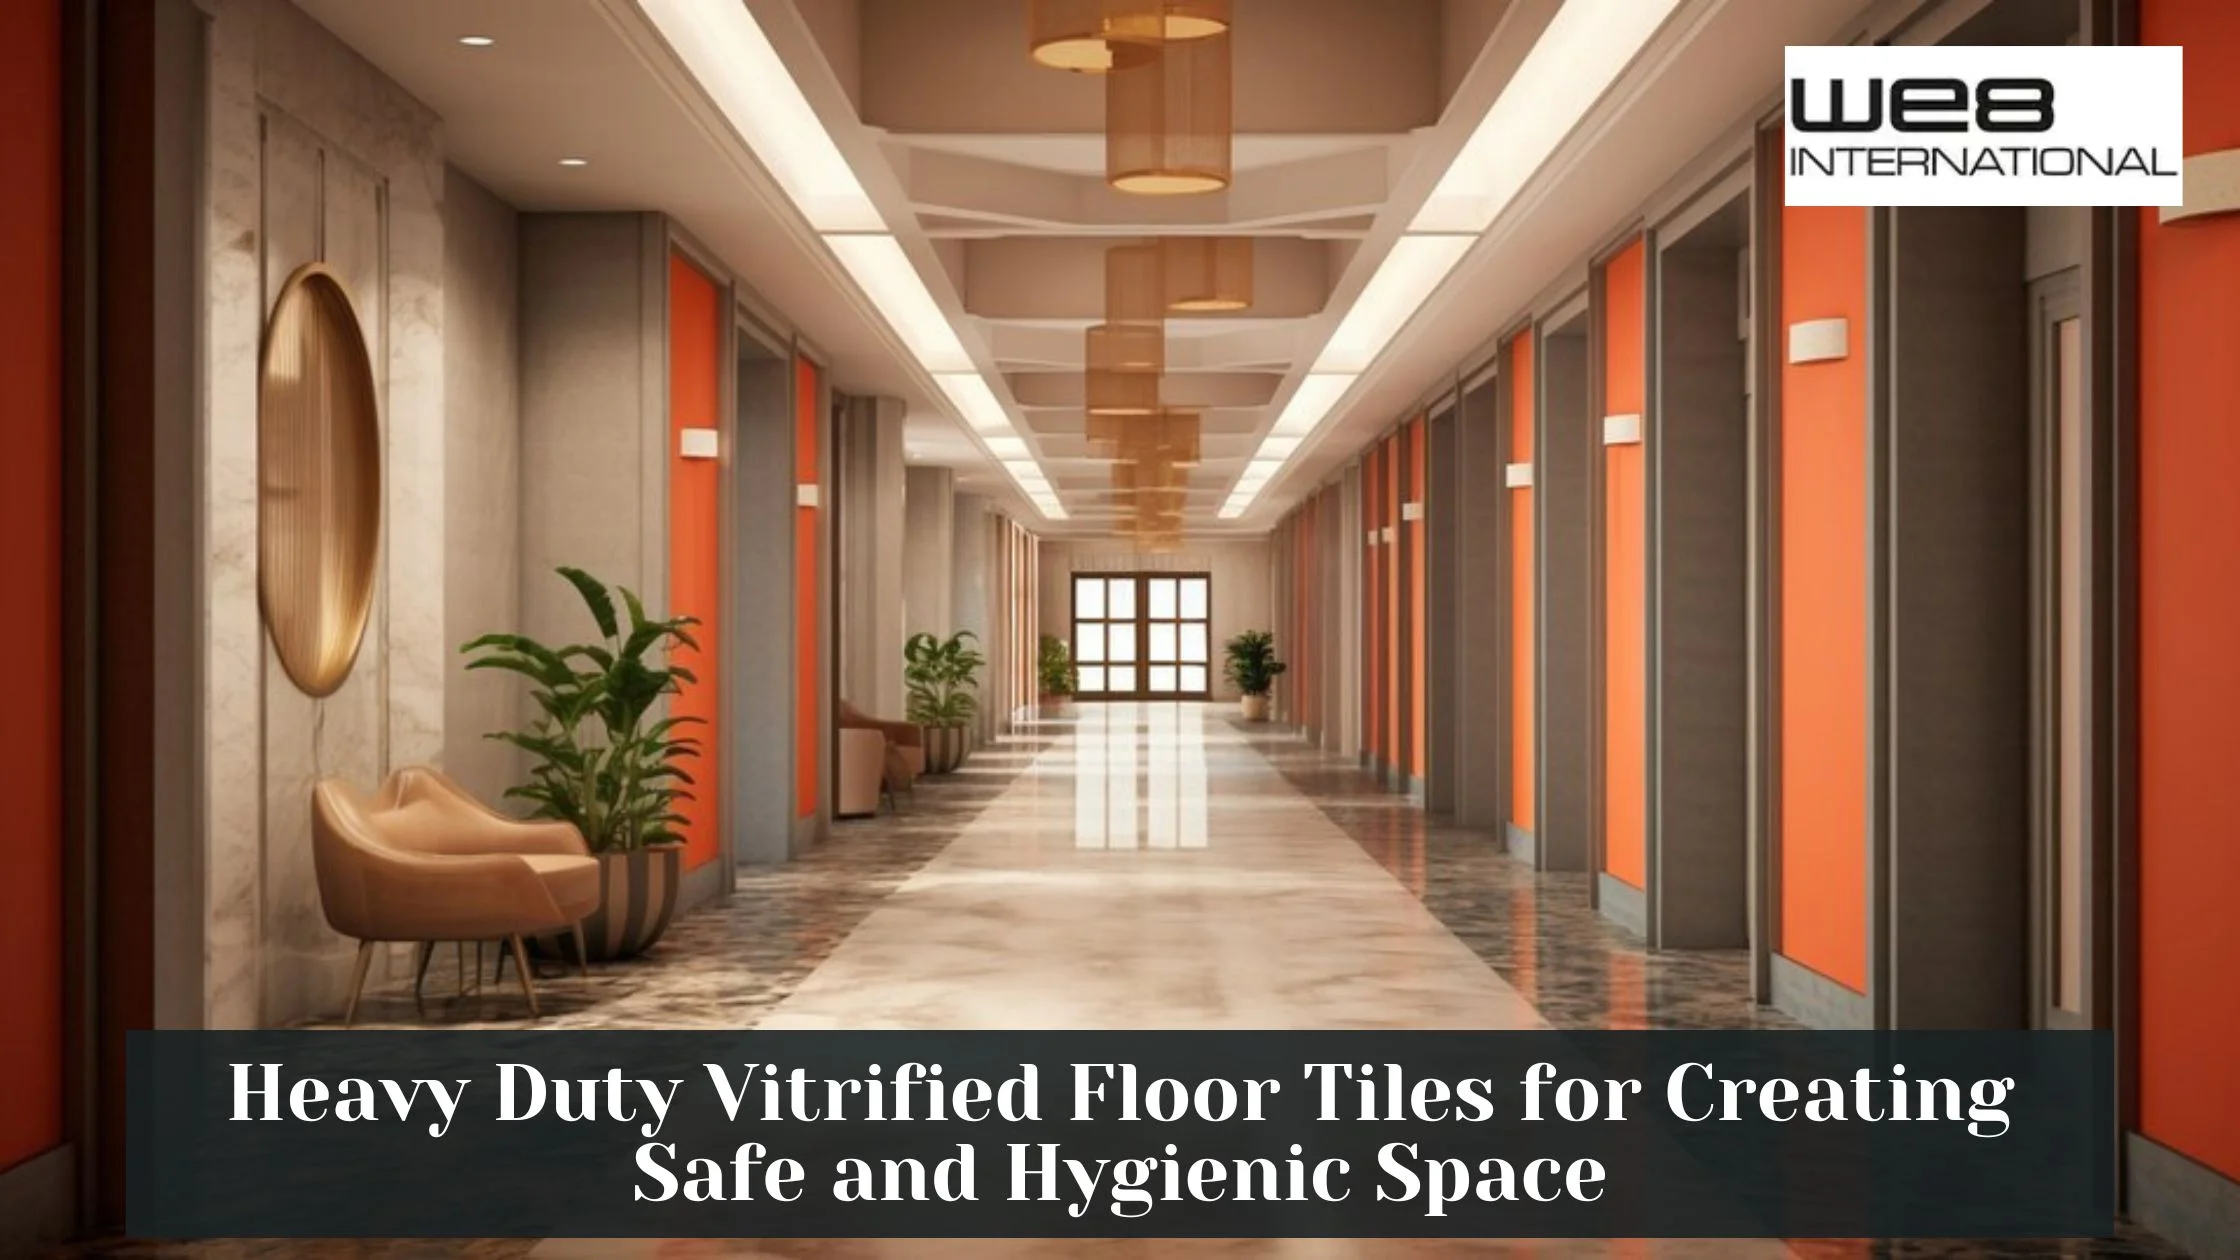 Heavy Duty Vitrified Floor Tiles for Creating Safe and Hygienic Space